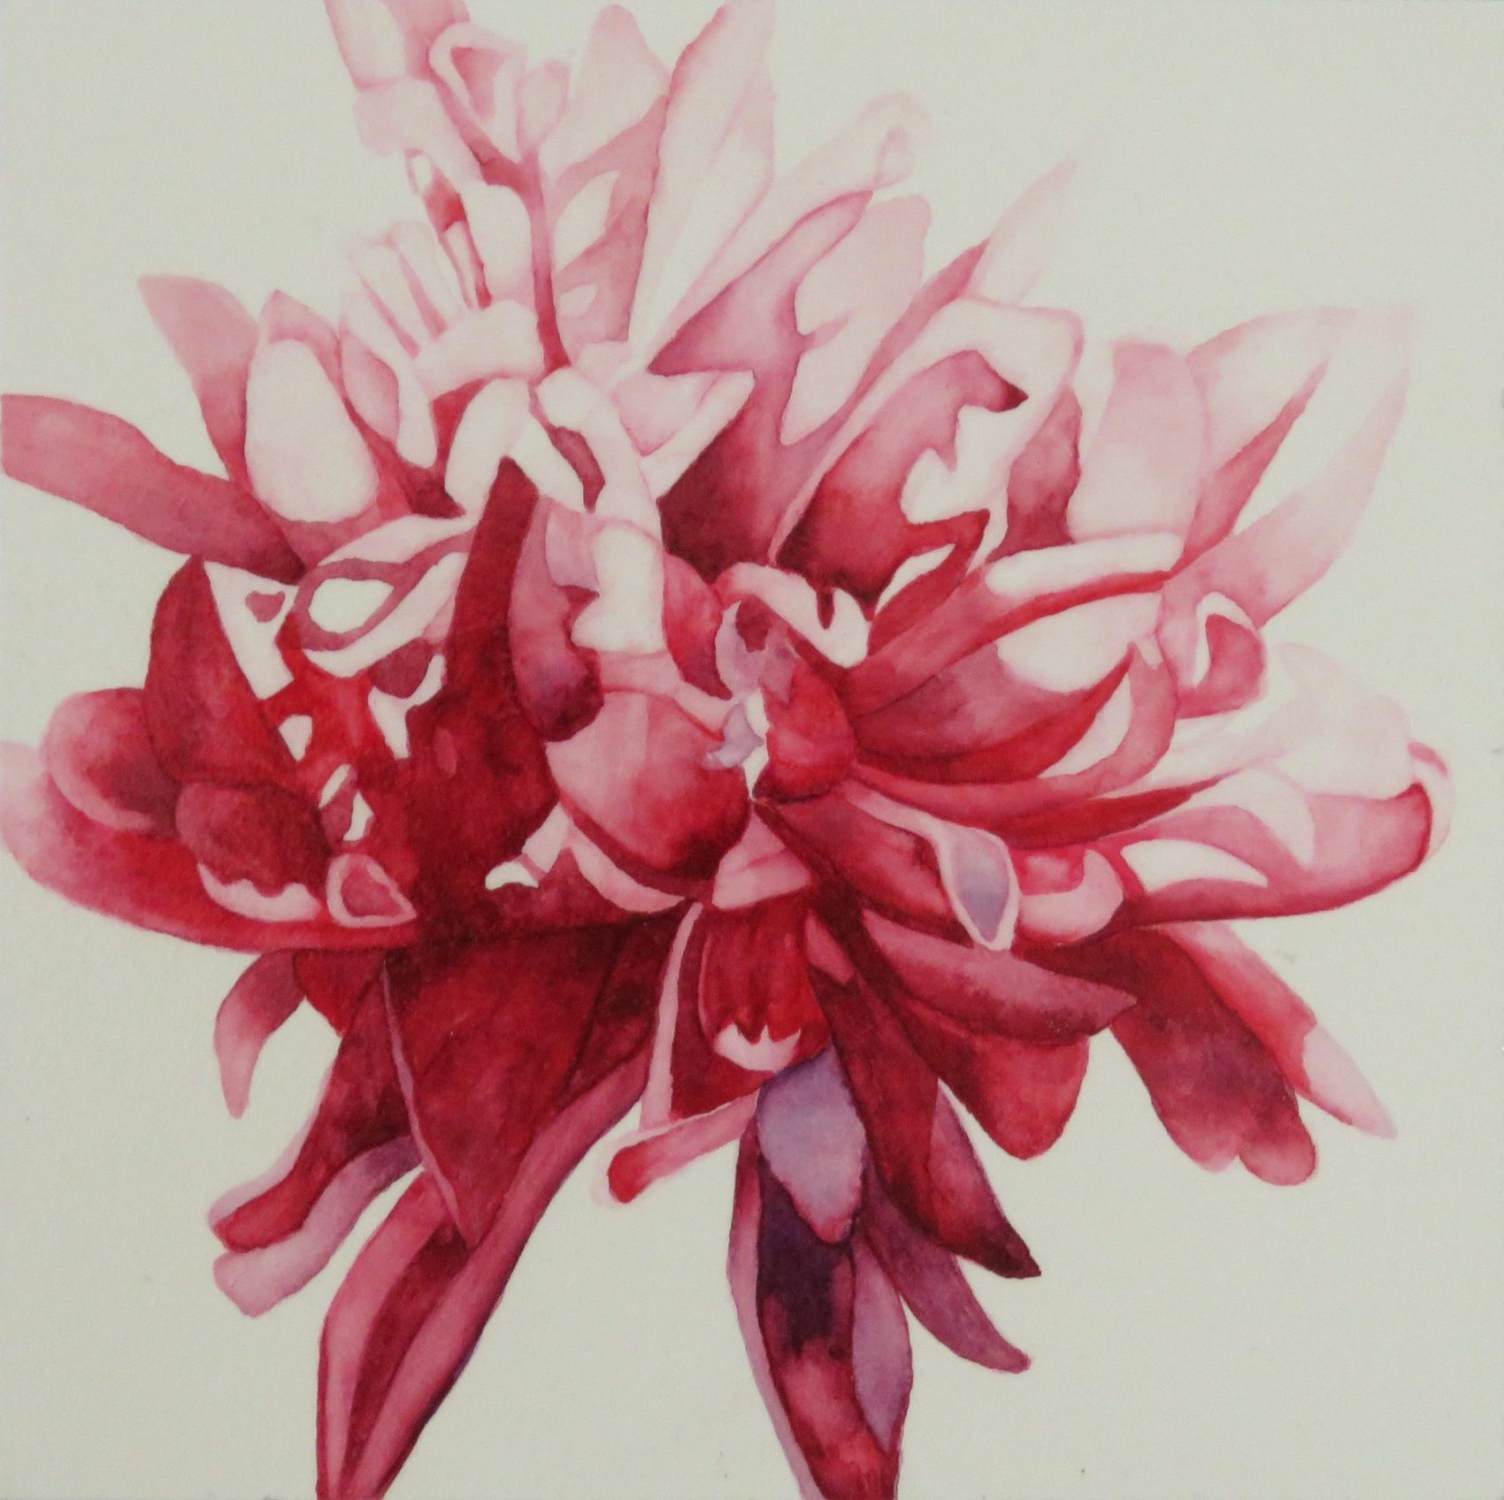 catherine-macaulay-peony-splash-floral-watercolour-contemporary-flower-painting-online-gallery